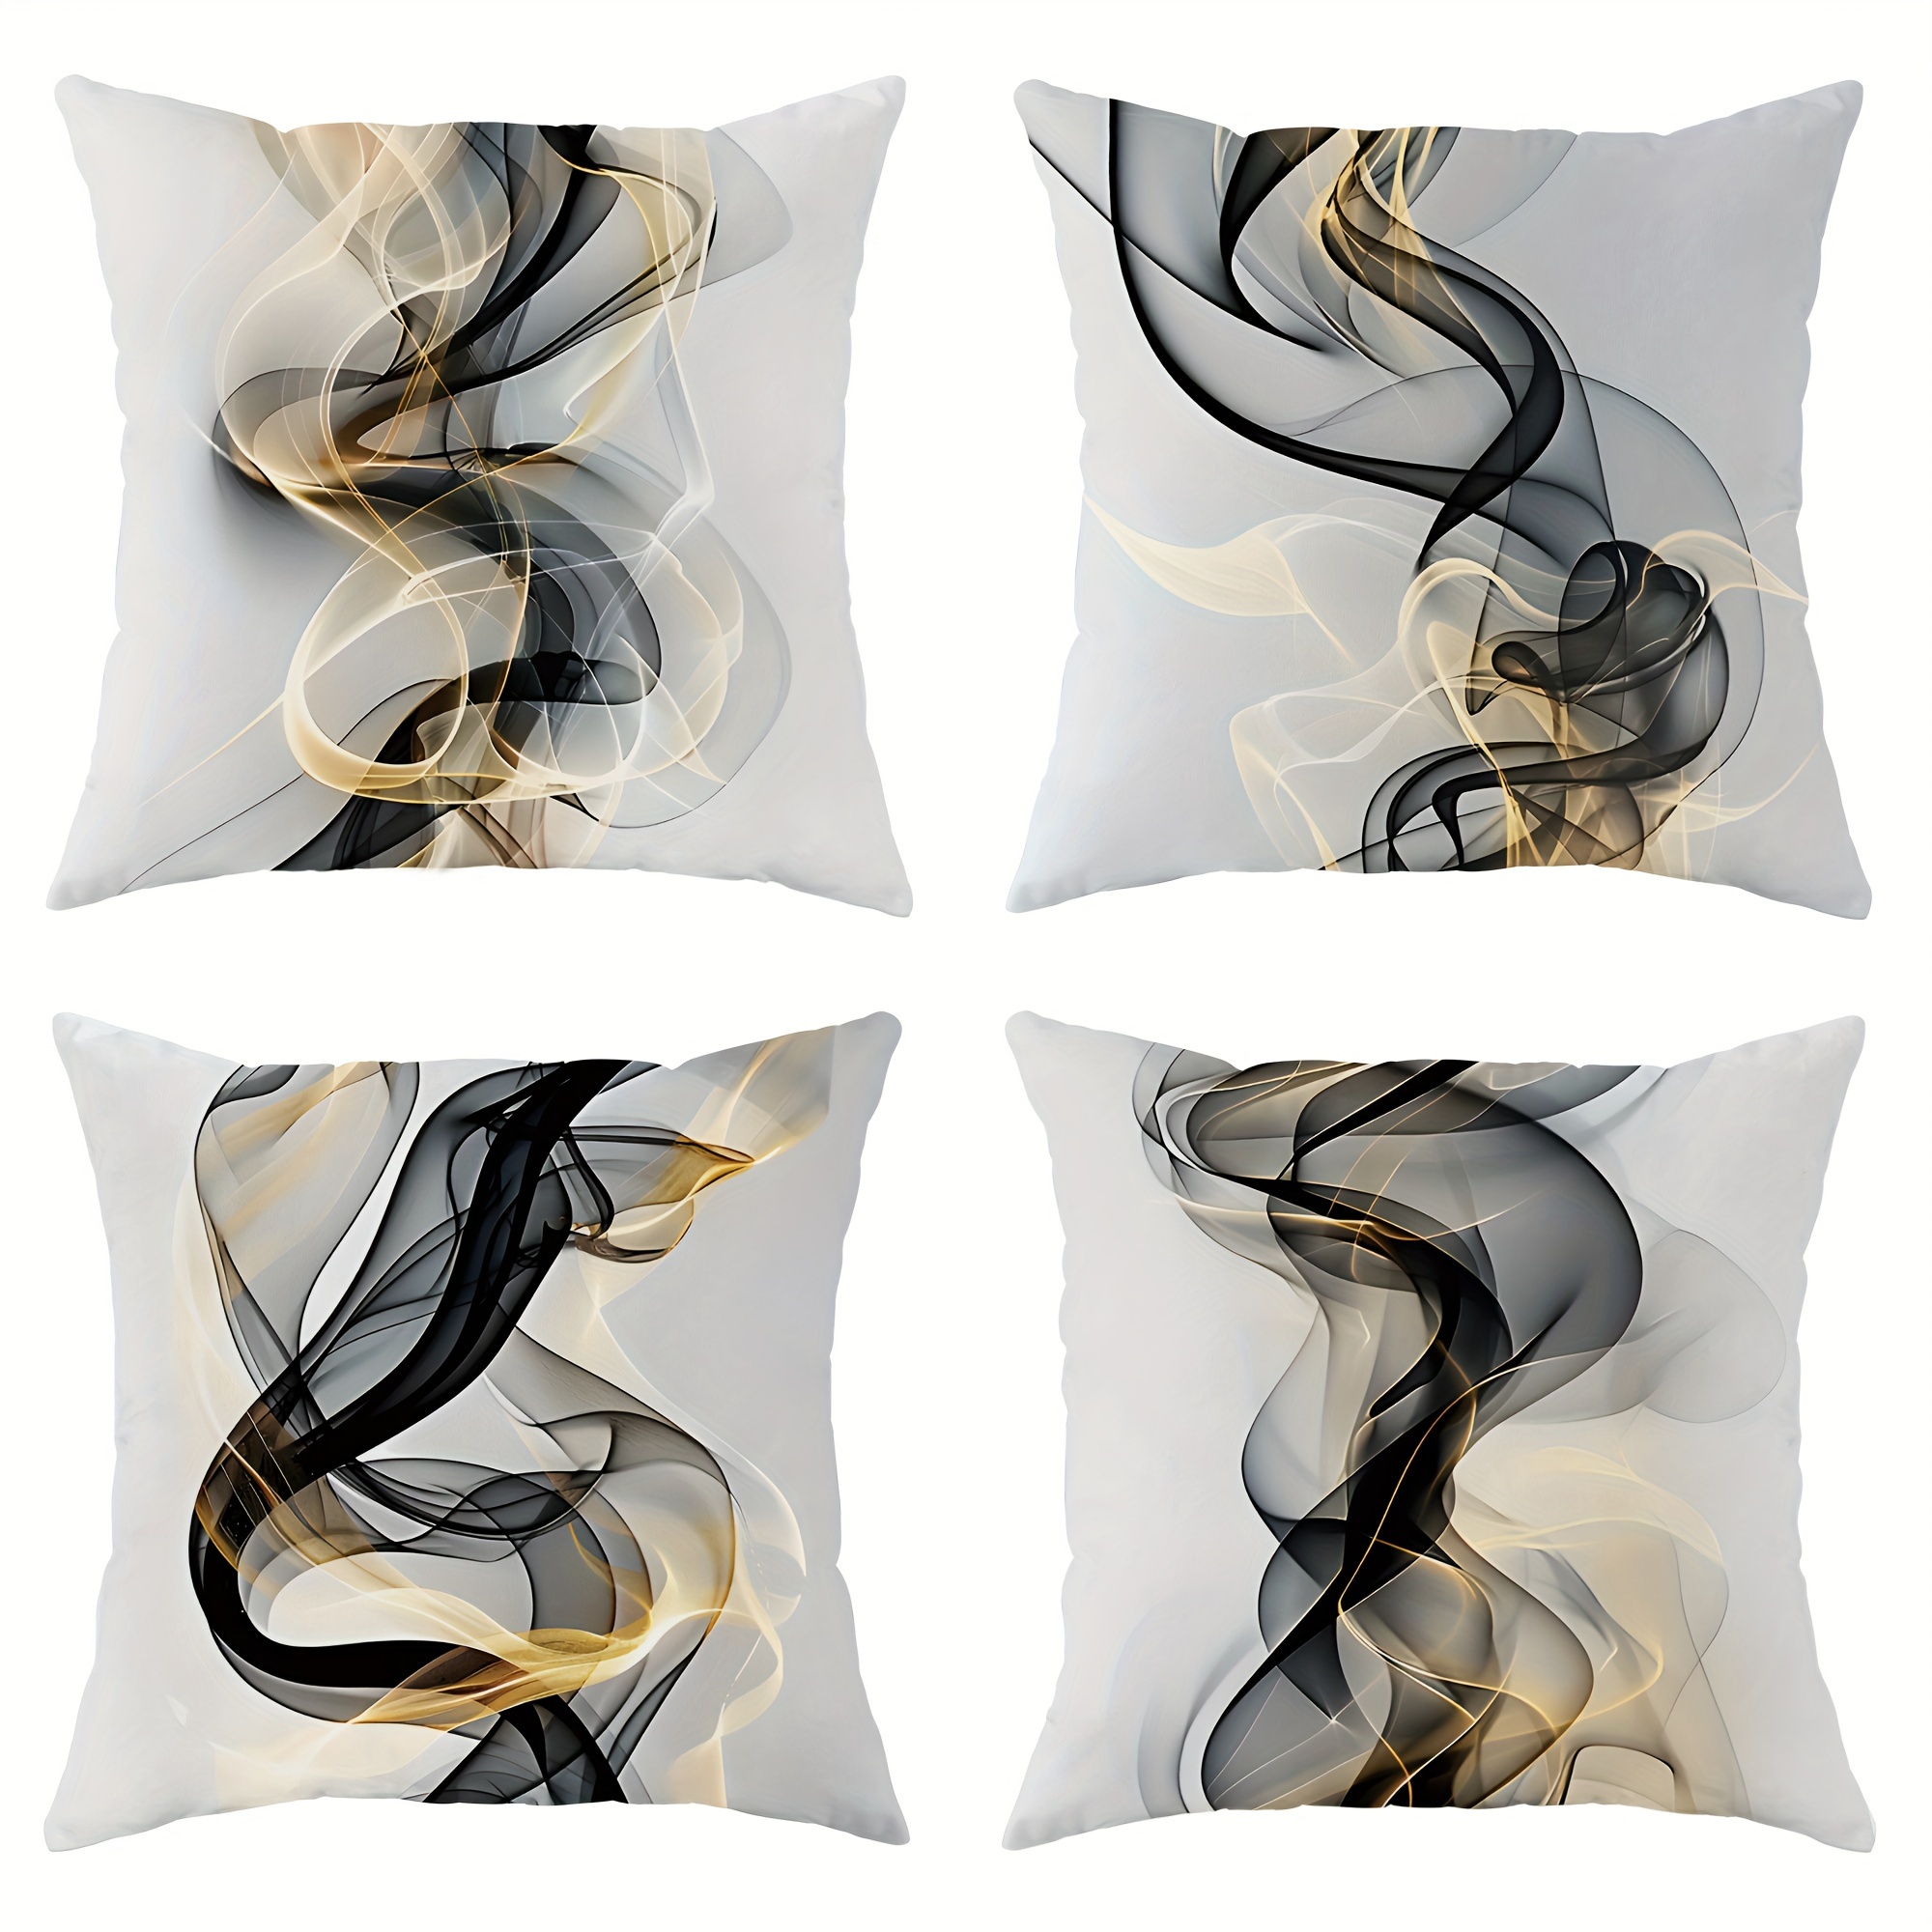 

4-piece Set Velvet Throw Pillow Covers - Modern Abstract Design In Gold, Black & White | 18x18 Inches | Zip Closure | Machine Washable | Perfect For Living Room & Bedroom Decor